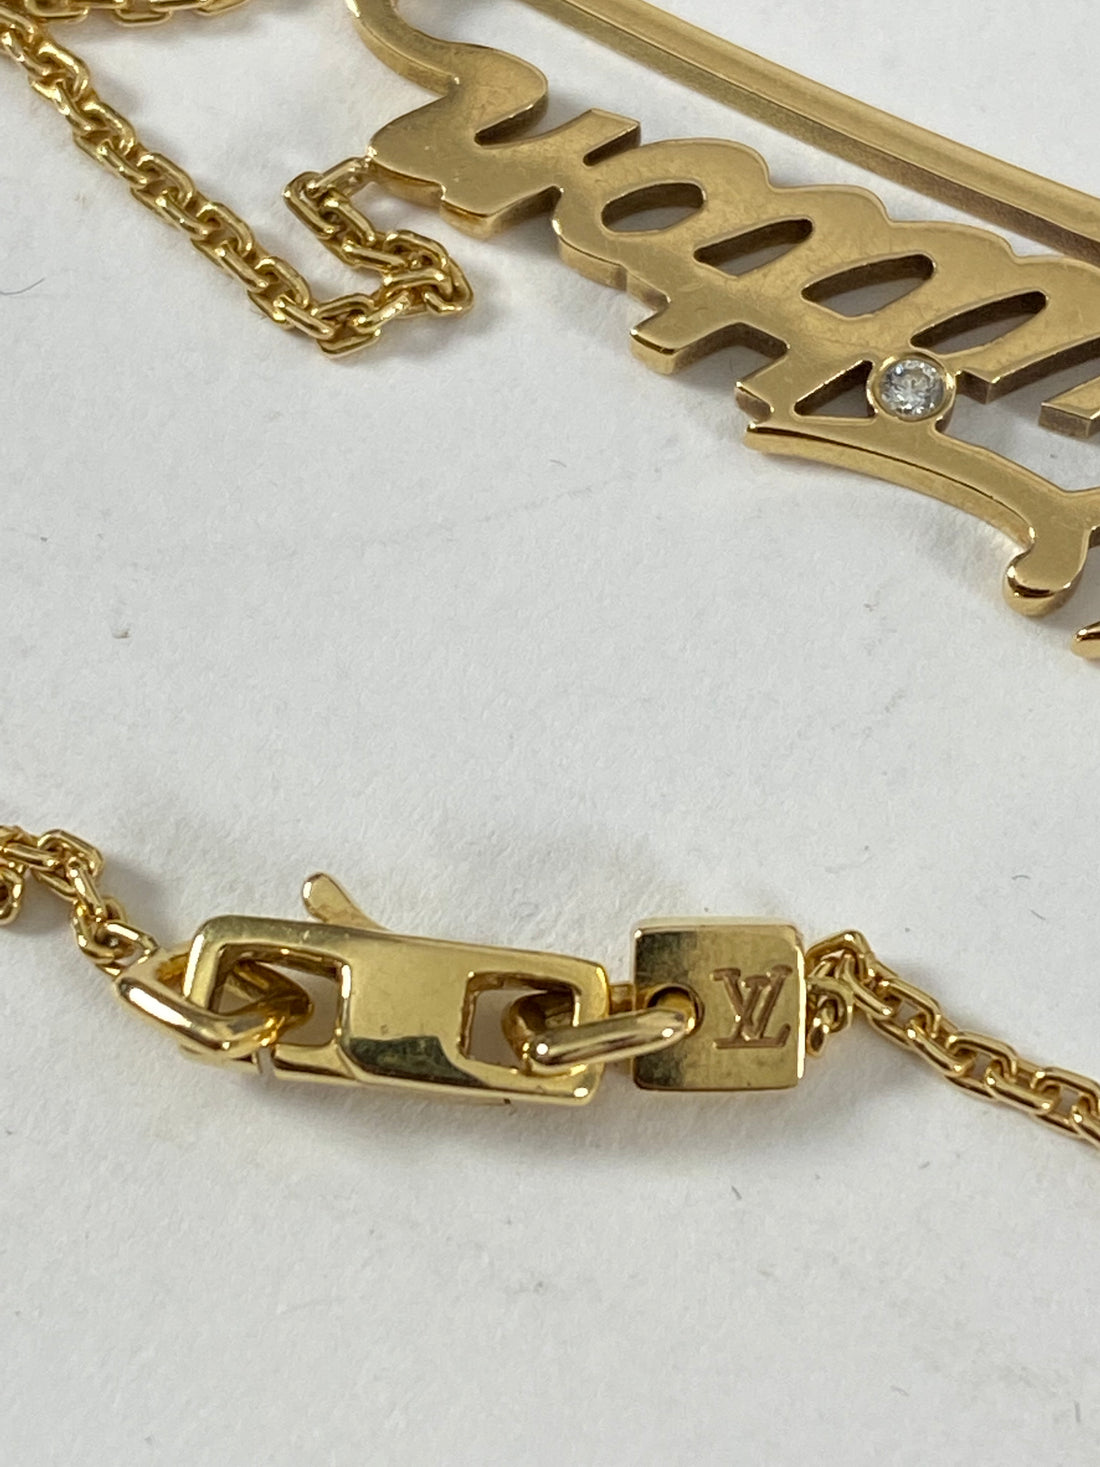 Louis Vuitton Diamond Signature ID Name Plate Necklace 18K Yellow Gold  wPouch